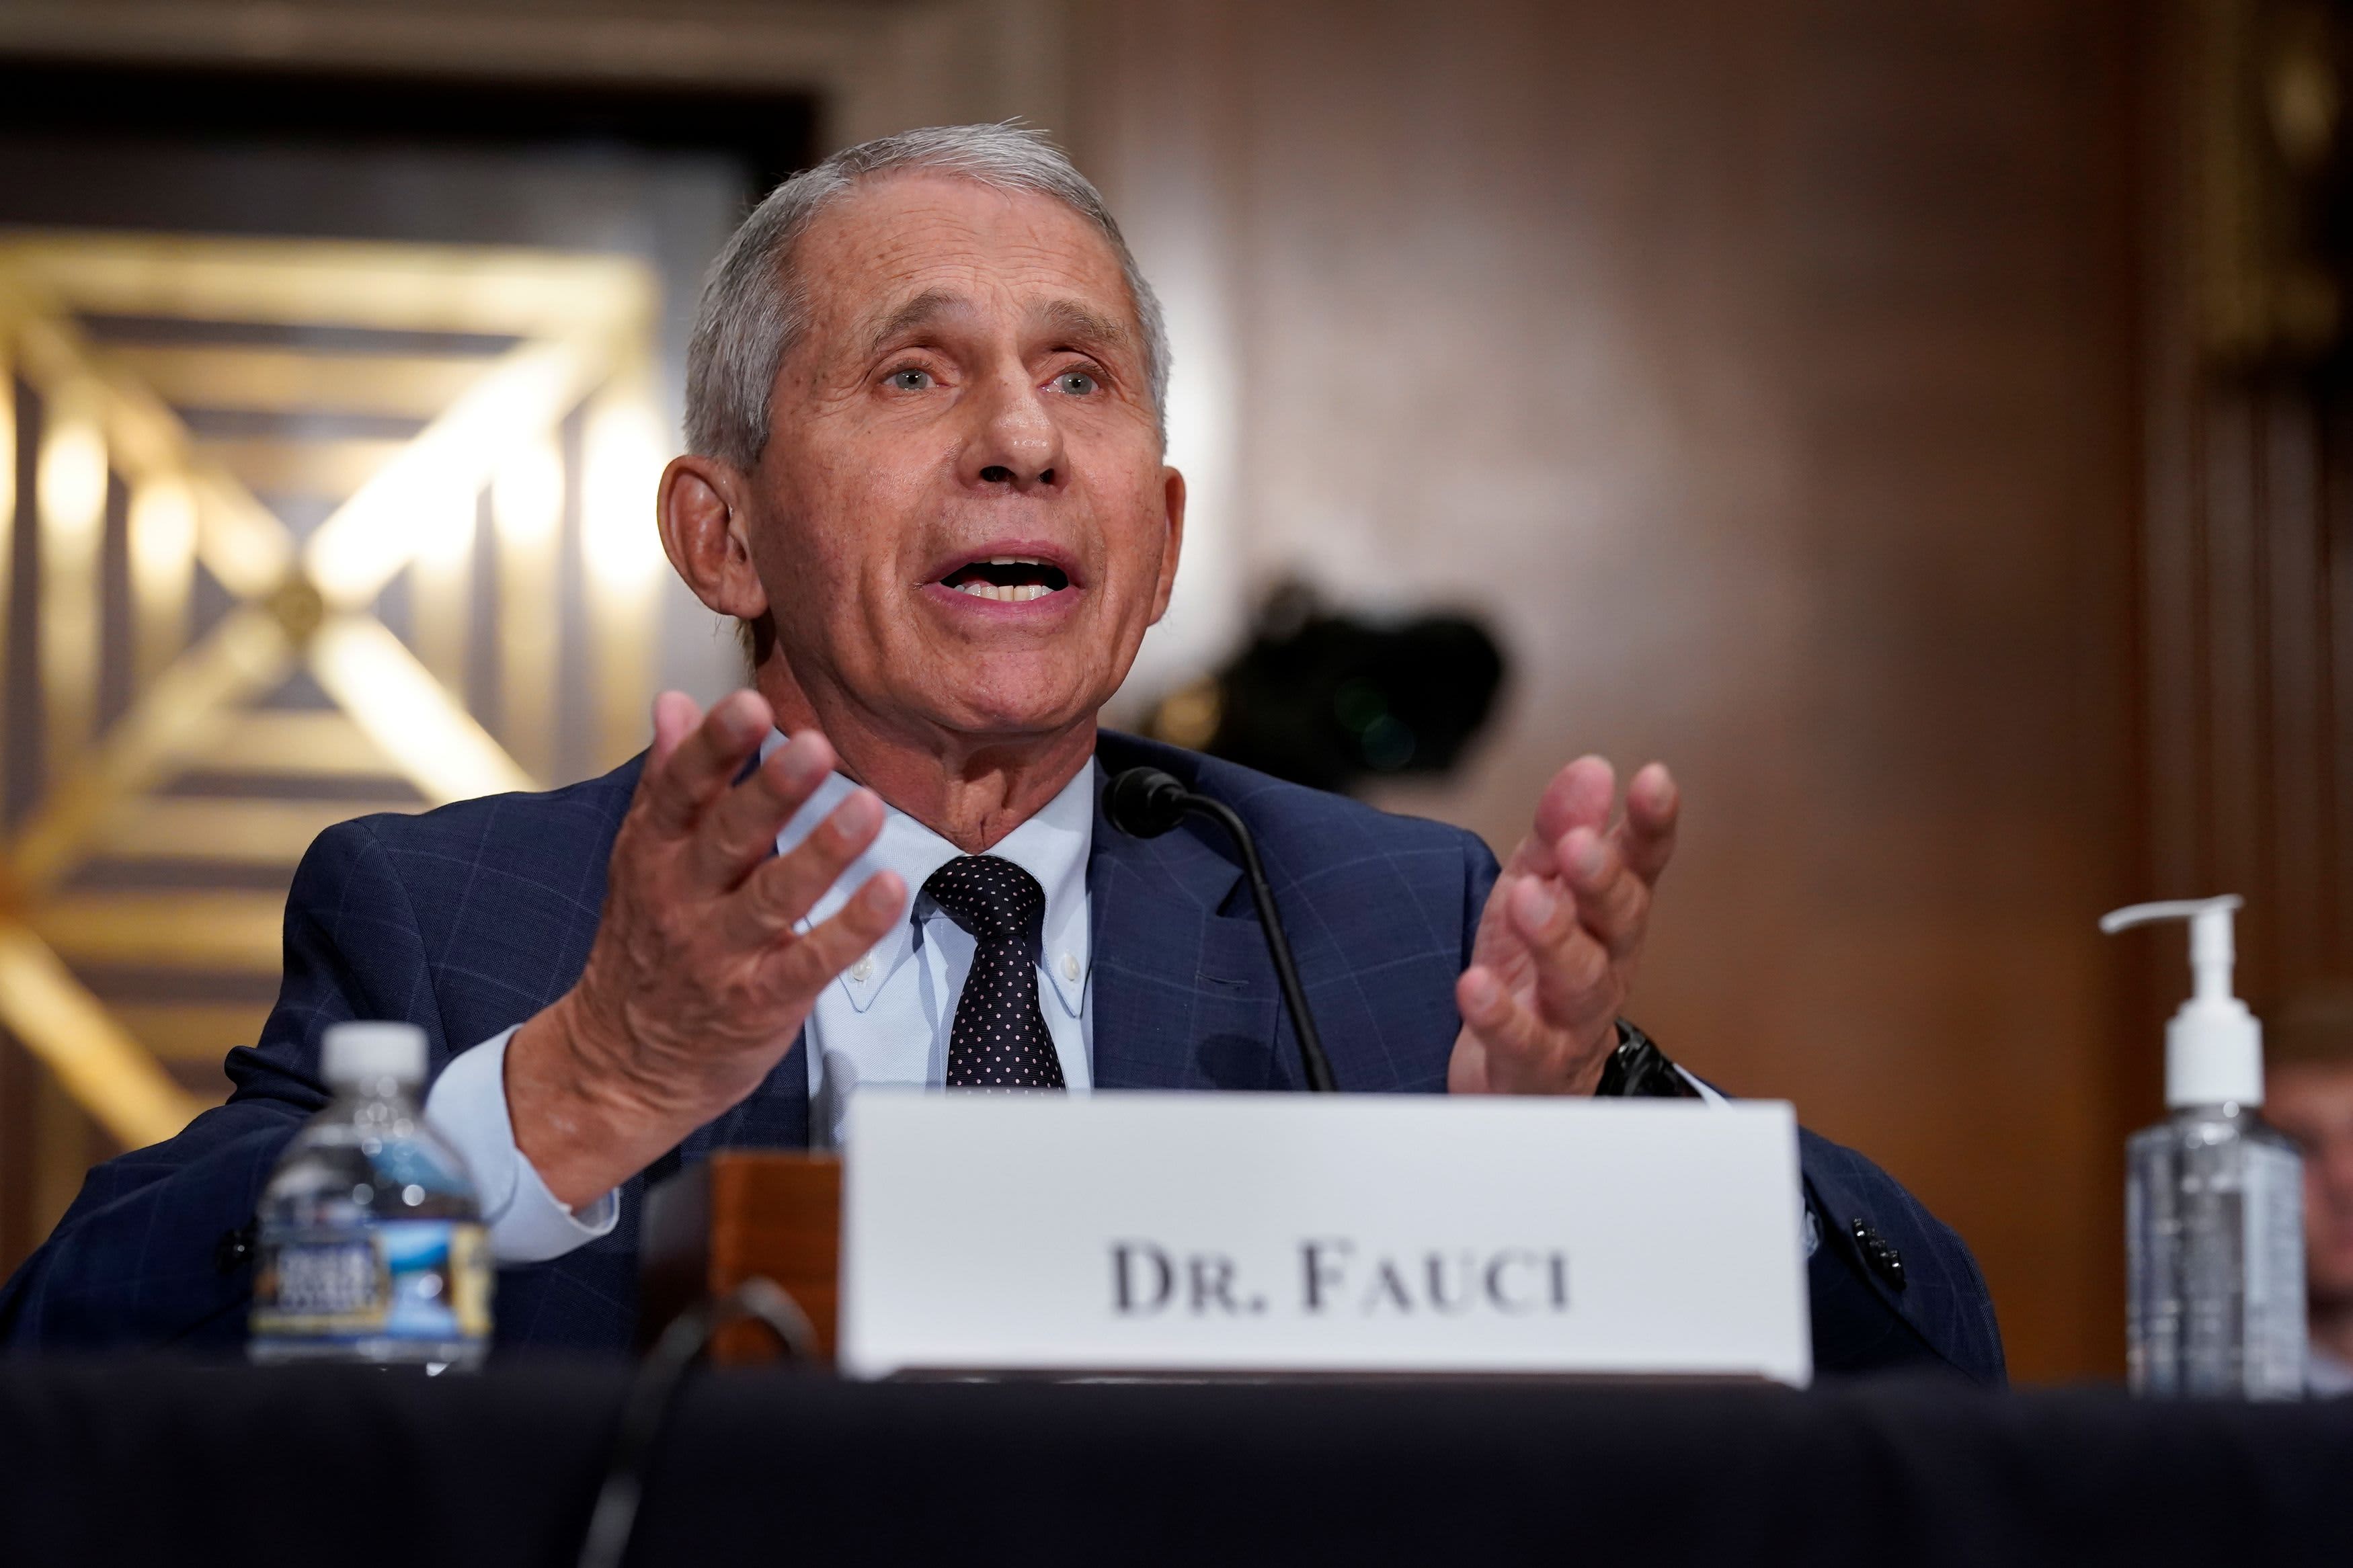 Epidemiologist agrees with Fauci, says everybody will someday 'likely' need a booster shot of the Covid vaccines